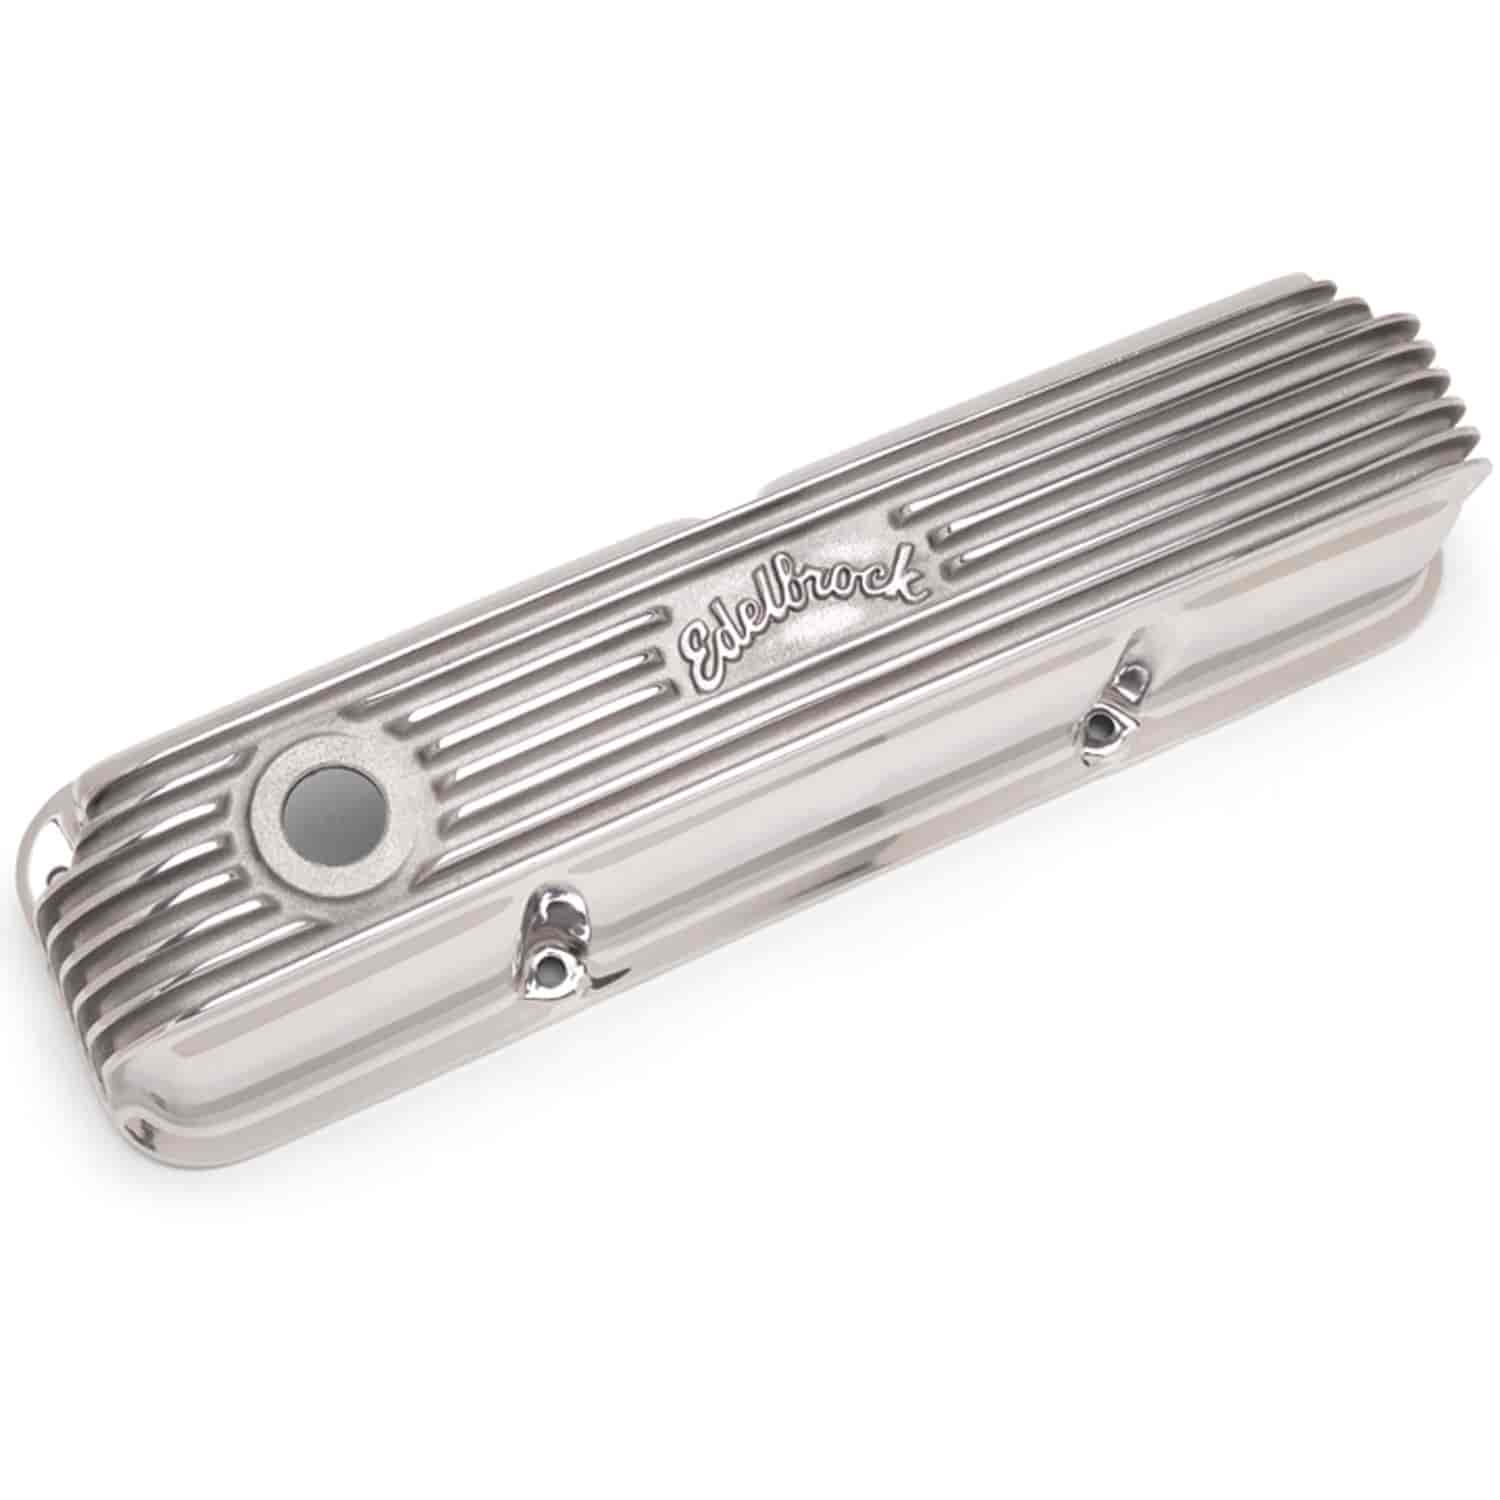 Classic Finned Valve Covers for 1958-1976 Ford FE with Polished Finish